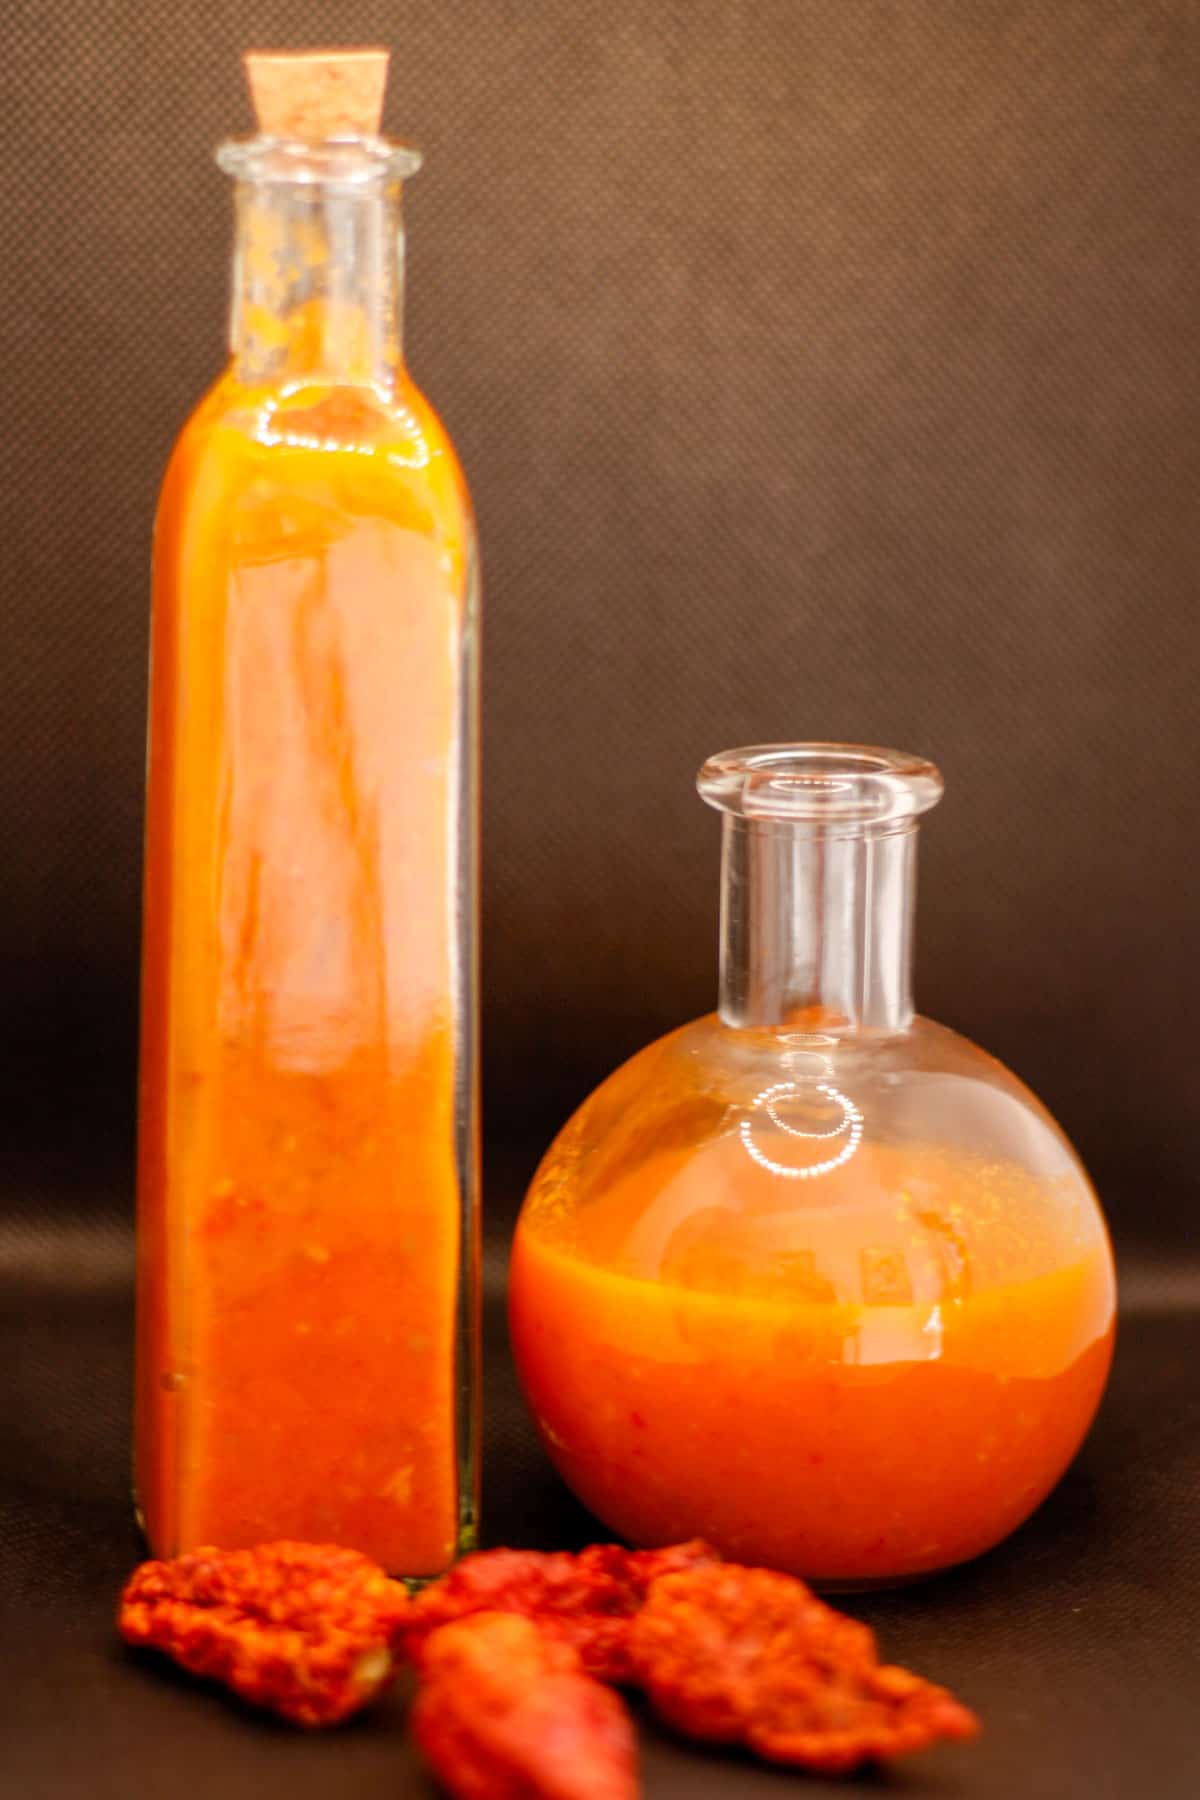 Glass bottles containing homemade ghost pepper hot sauce and some dried ghost peppers in front of the glass bottles.